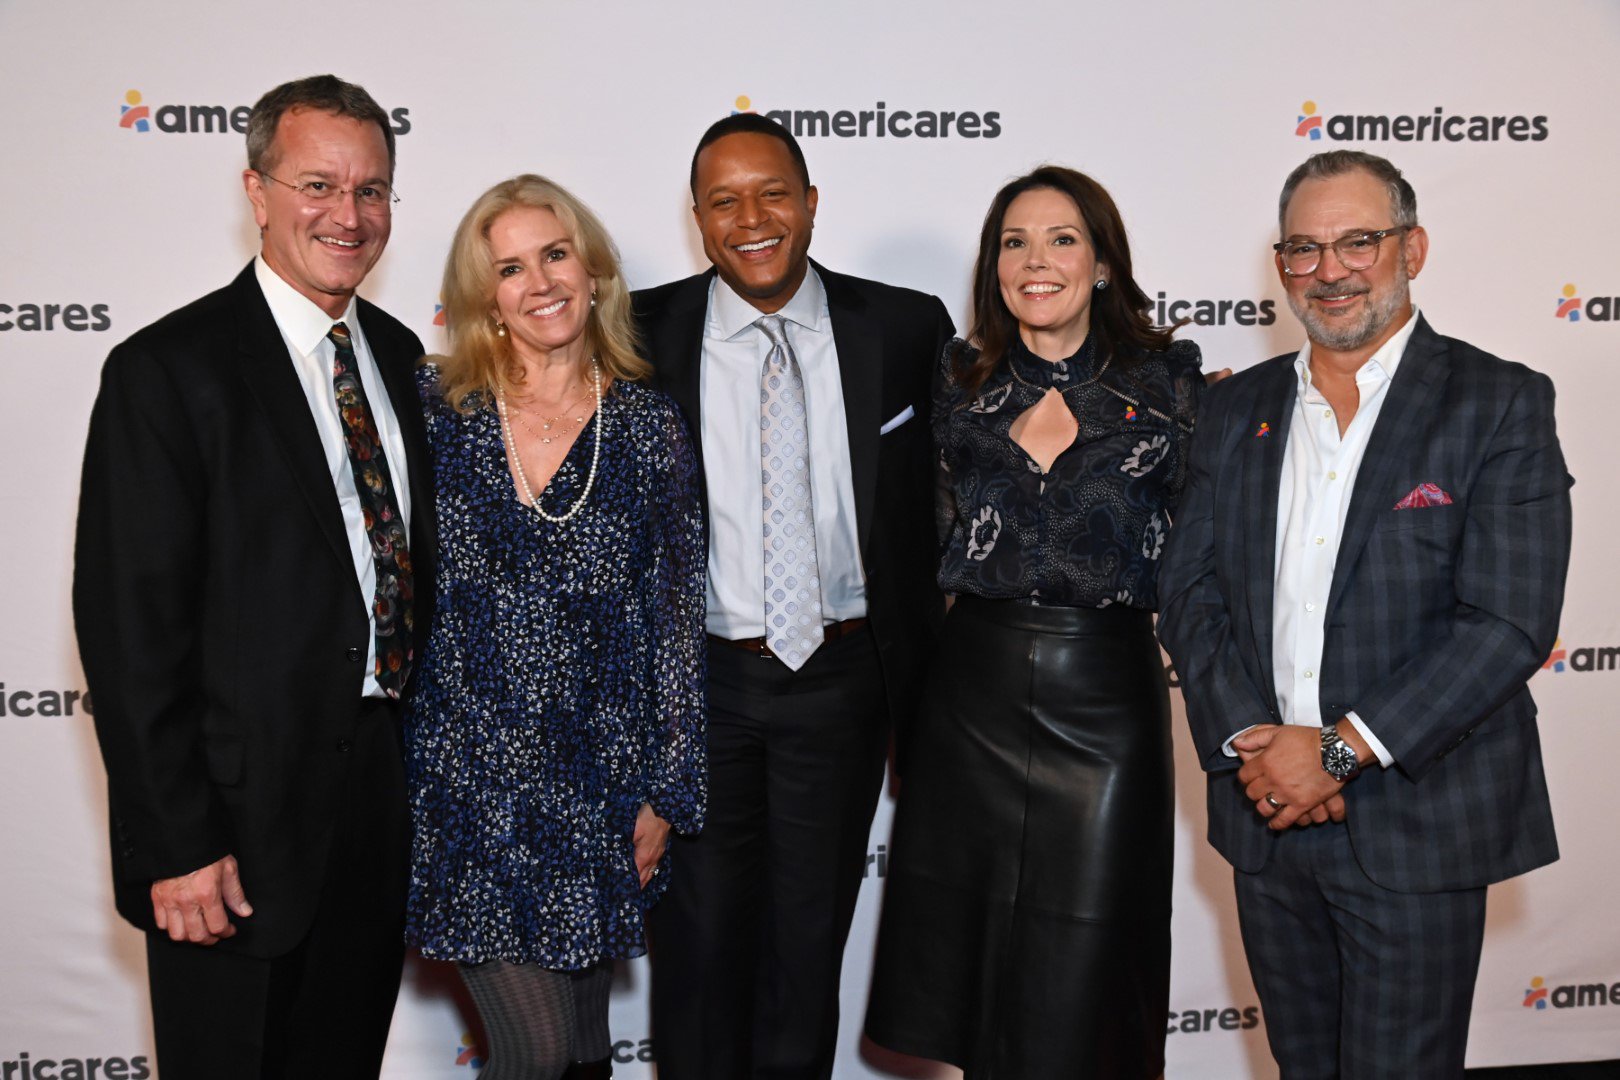 Event Co-Chairs Eric and Joy Weintz and Erica Hill and David Yount with News Anchor, NBC News’ “TODAY” and Co-Host, “3rd Hour of TODAY” and Master of Ceremonies Craig Melvin at the 2022 Americares Airlift Benefit at Westchester County Airport on October 1, 2022. Photo by Bryan Bedder/Getty Images for Americares.